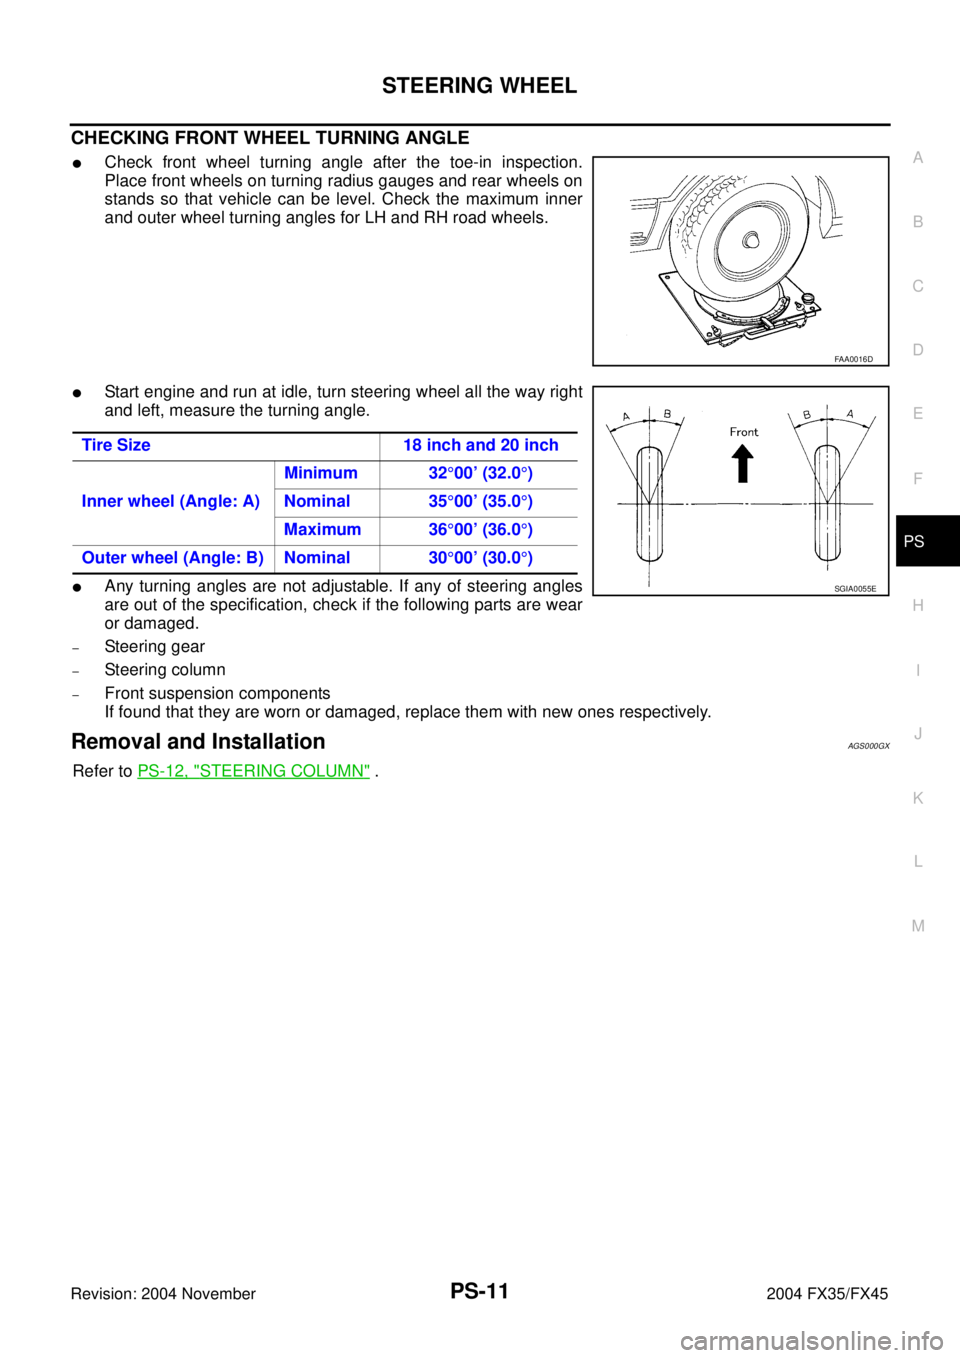 INFINITI FX35 2004  Service Manual STEERING WHEEL
PS-11
C
D
E
F
H
I
J
K
L
MA
B
PS
Revision: 2004 November 2004 FX35/FX45
CHECKING FRONT WHEEL TURNING ANGLE 
Check front wheel turning angle after the toe-in inspection.
Place front whee